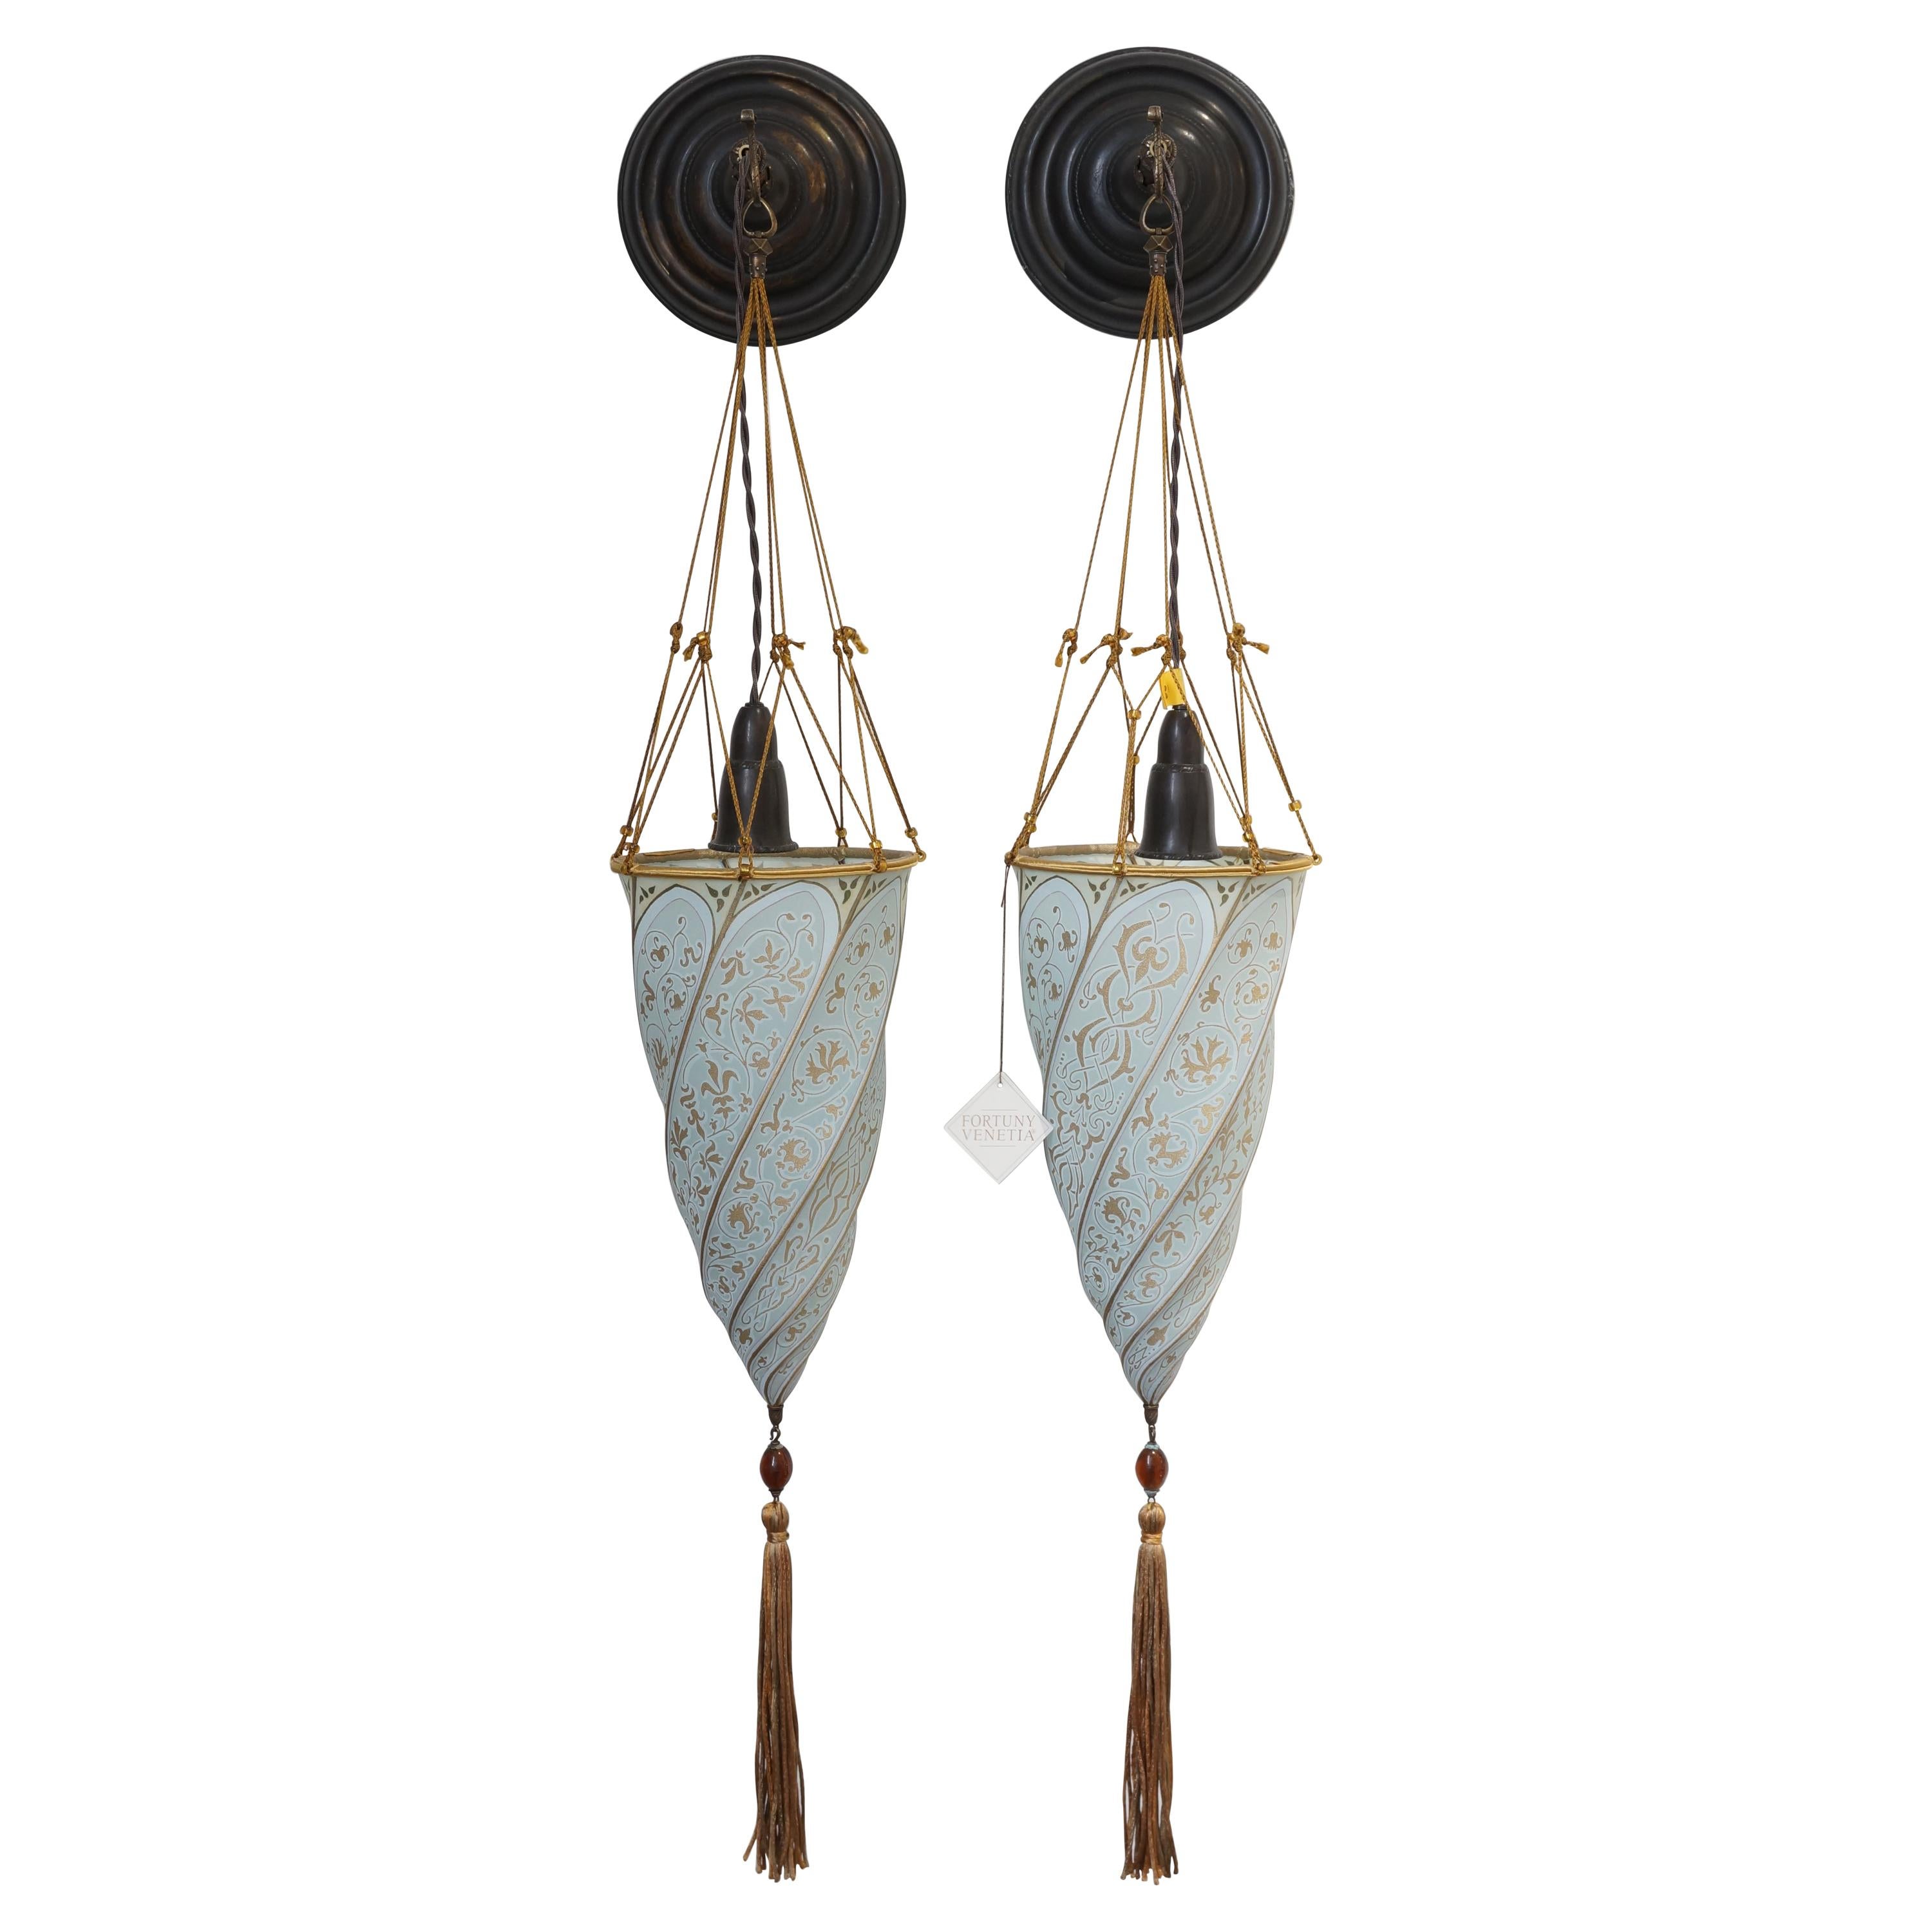 Pair of Fortuny Cesendello Silk Sconces